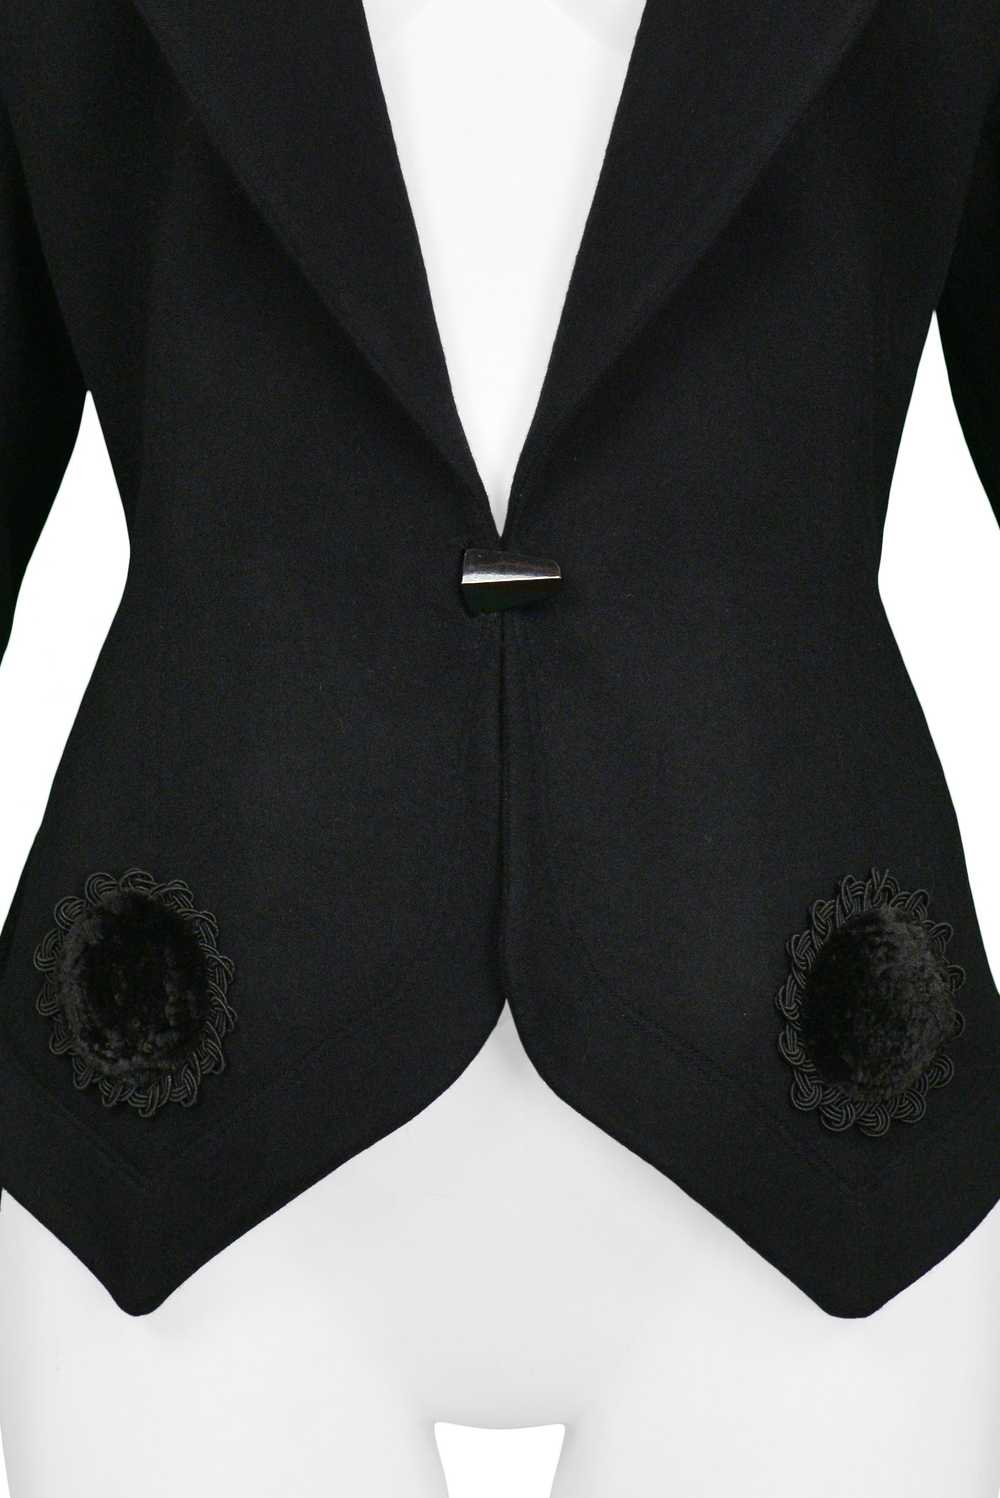 ALAIA BLACK FITTED BLAZER WITH VELVET APPLIQUE 19… - image 5